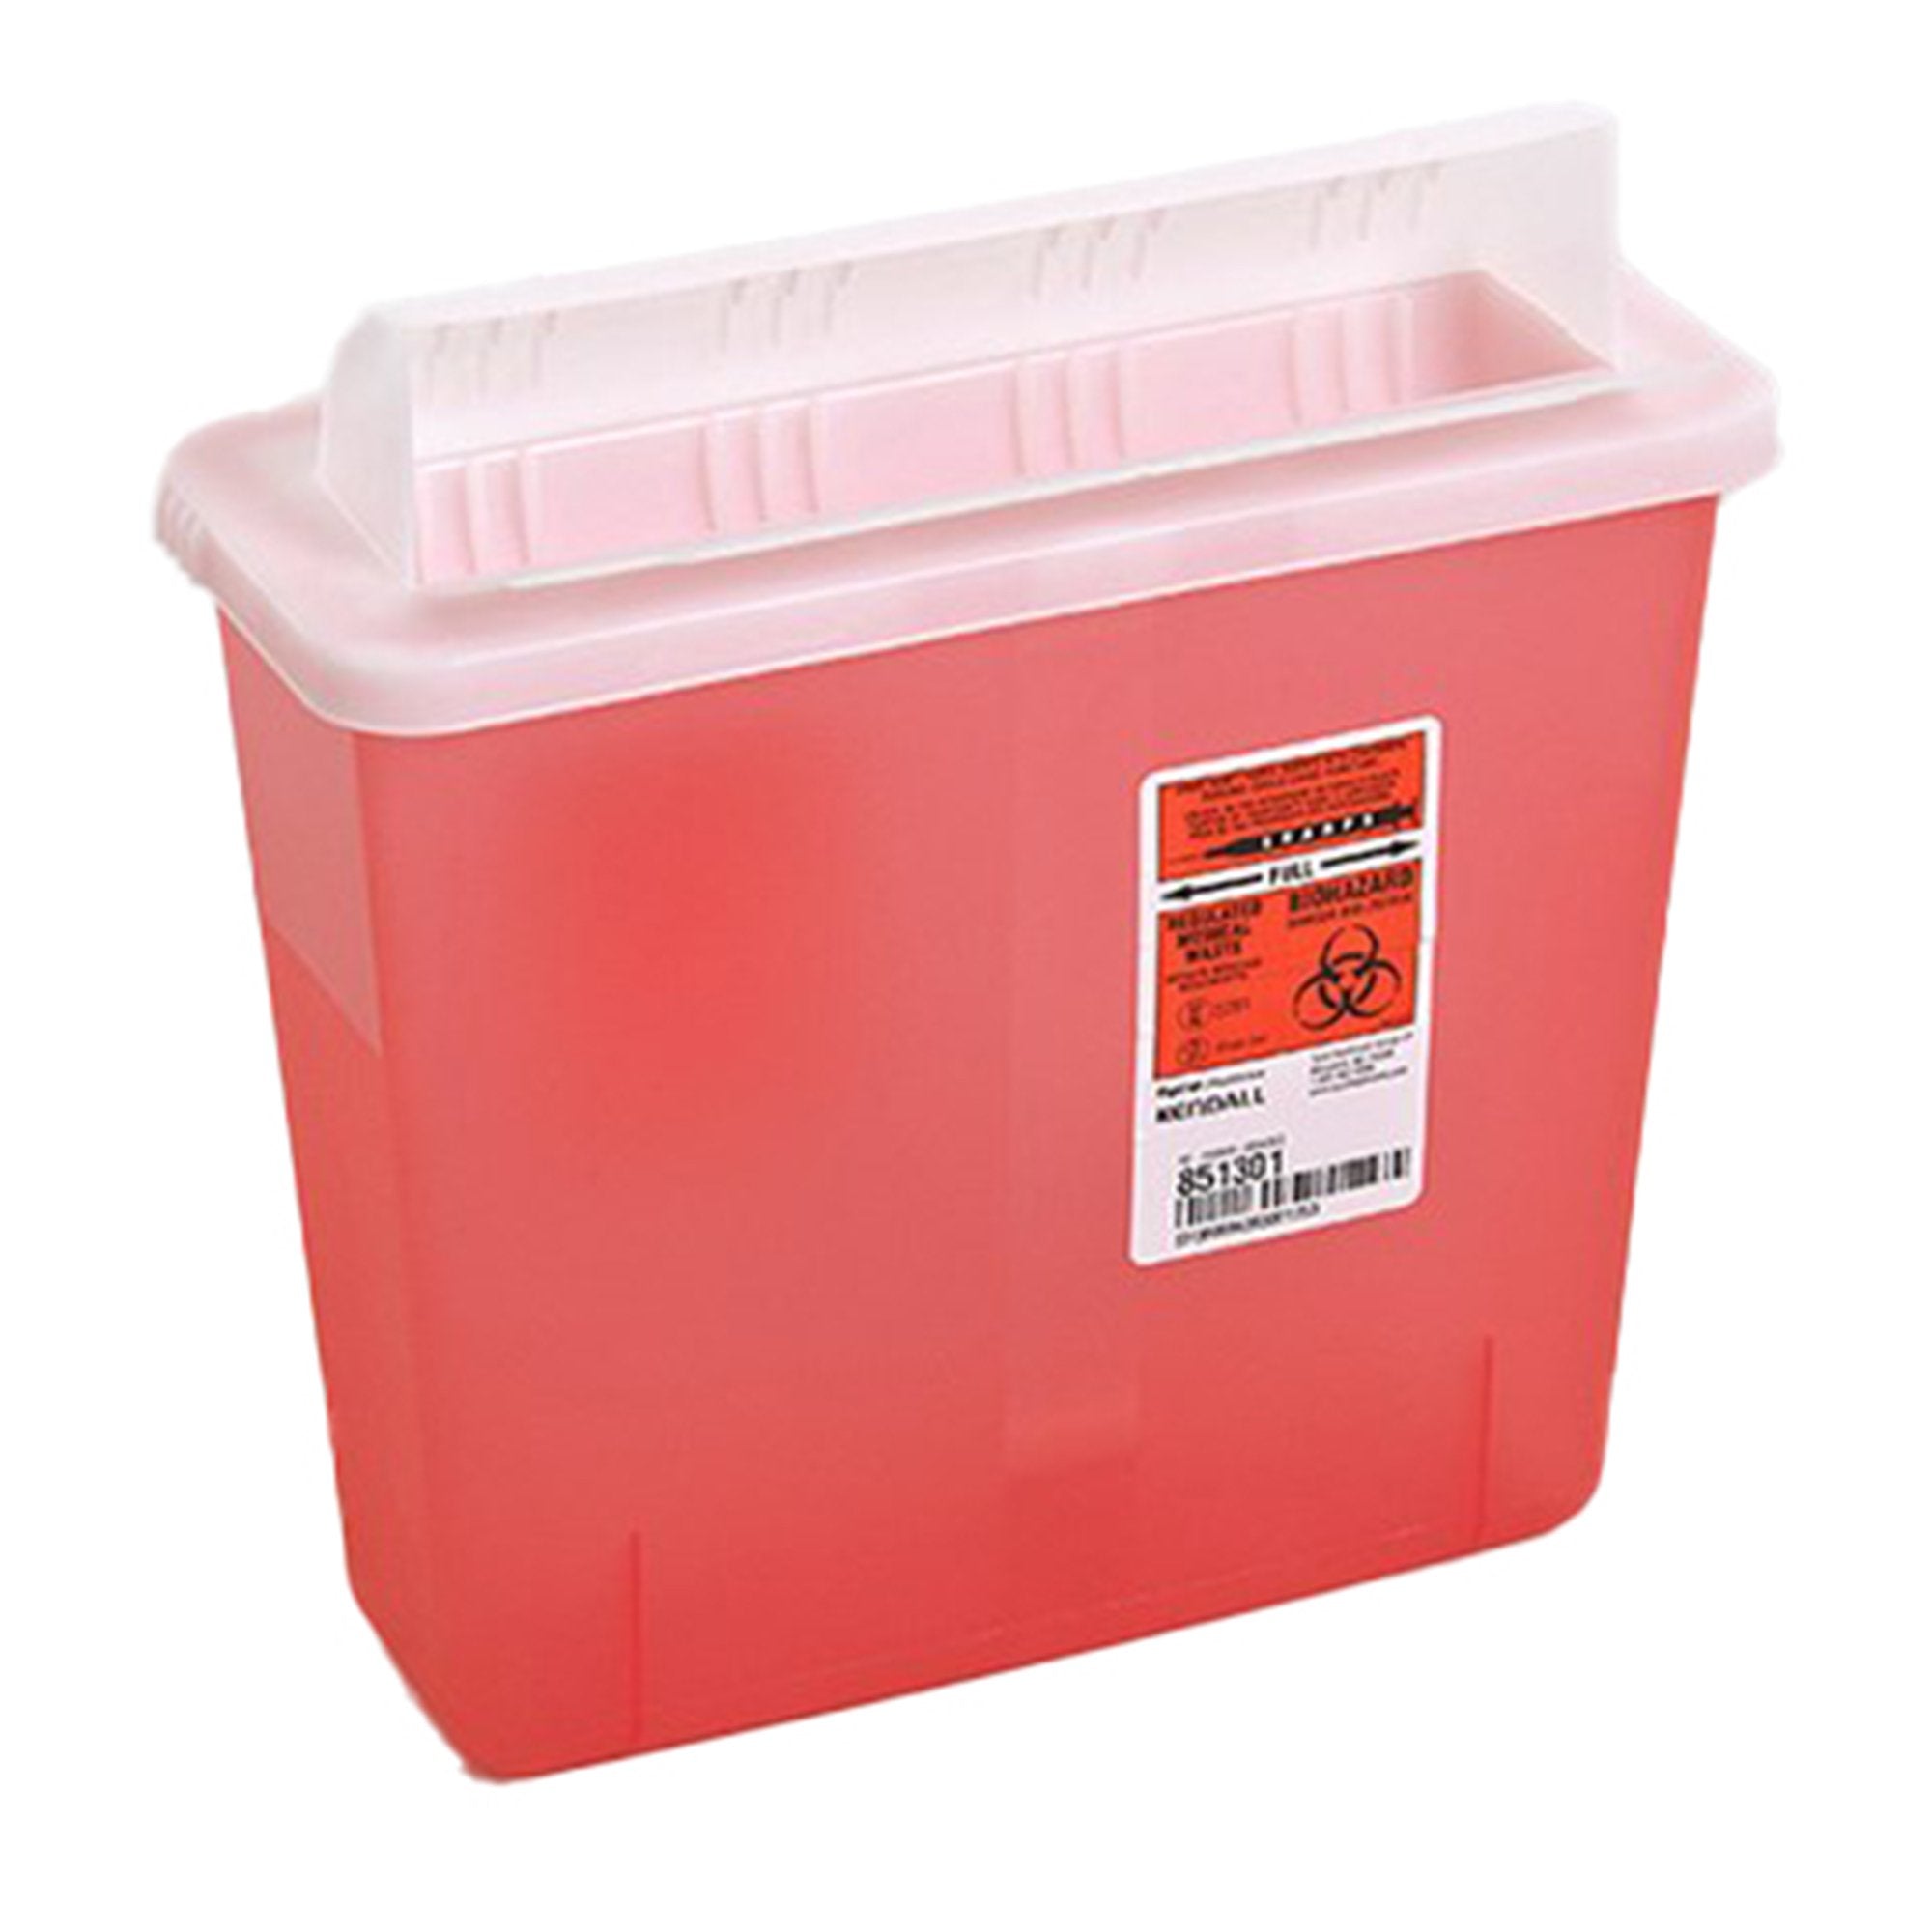 Sharps Container In-Room™ Translucent Red Base 11 H X 10-3/4 W X 4-3/4 D Inch Horizontal Entry 1.25 Gallon